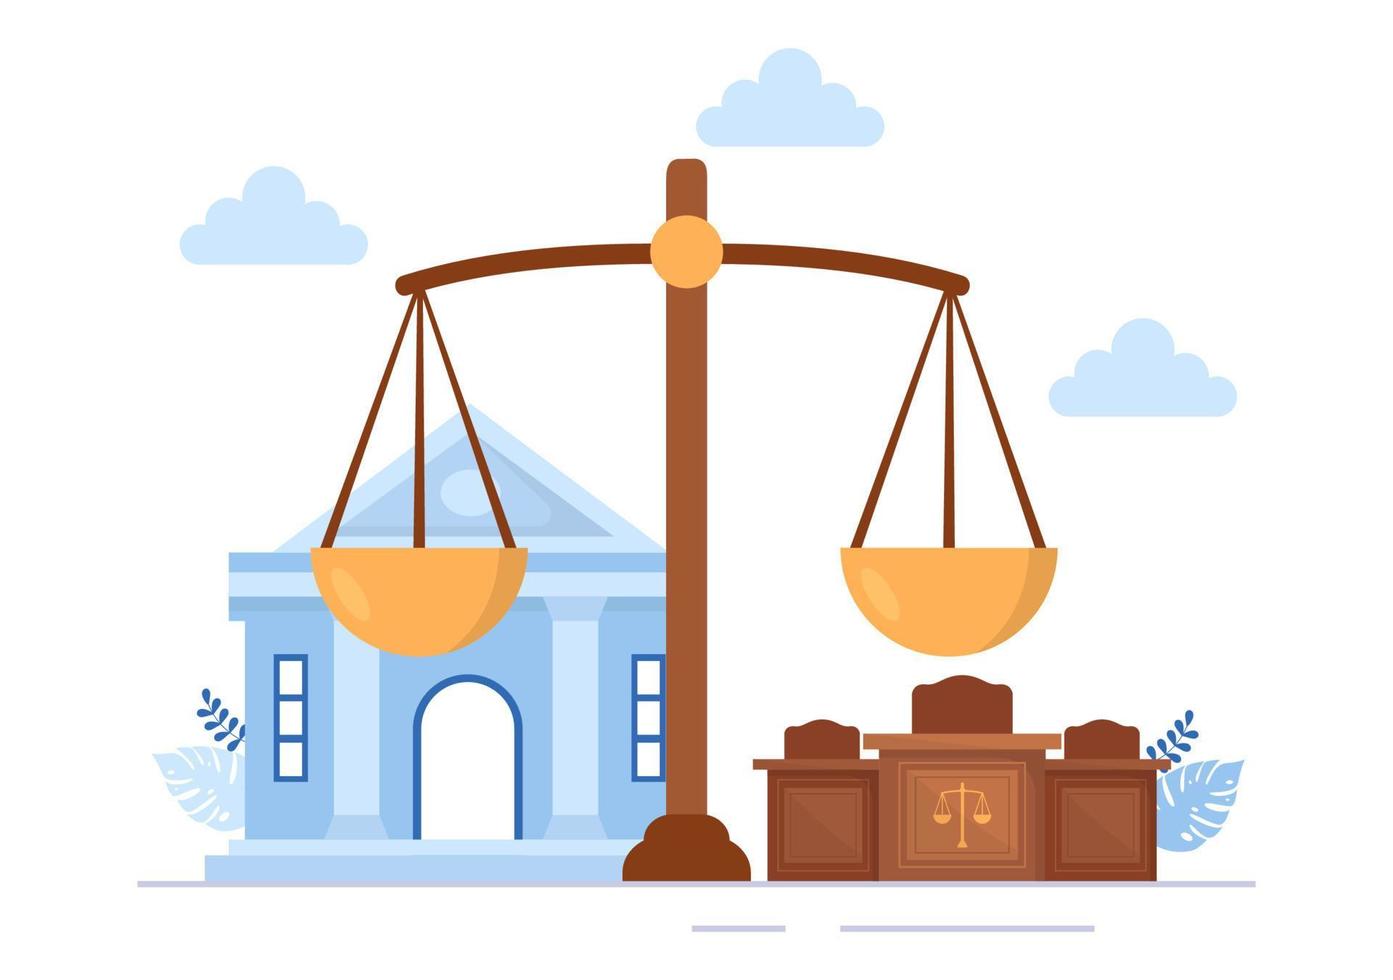 Court there is Justice, Decision and Law with Laws, Scales, Buildings, Wooden Judge Hammer in Flat Cartoon Design Illustration vector